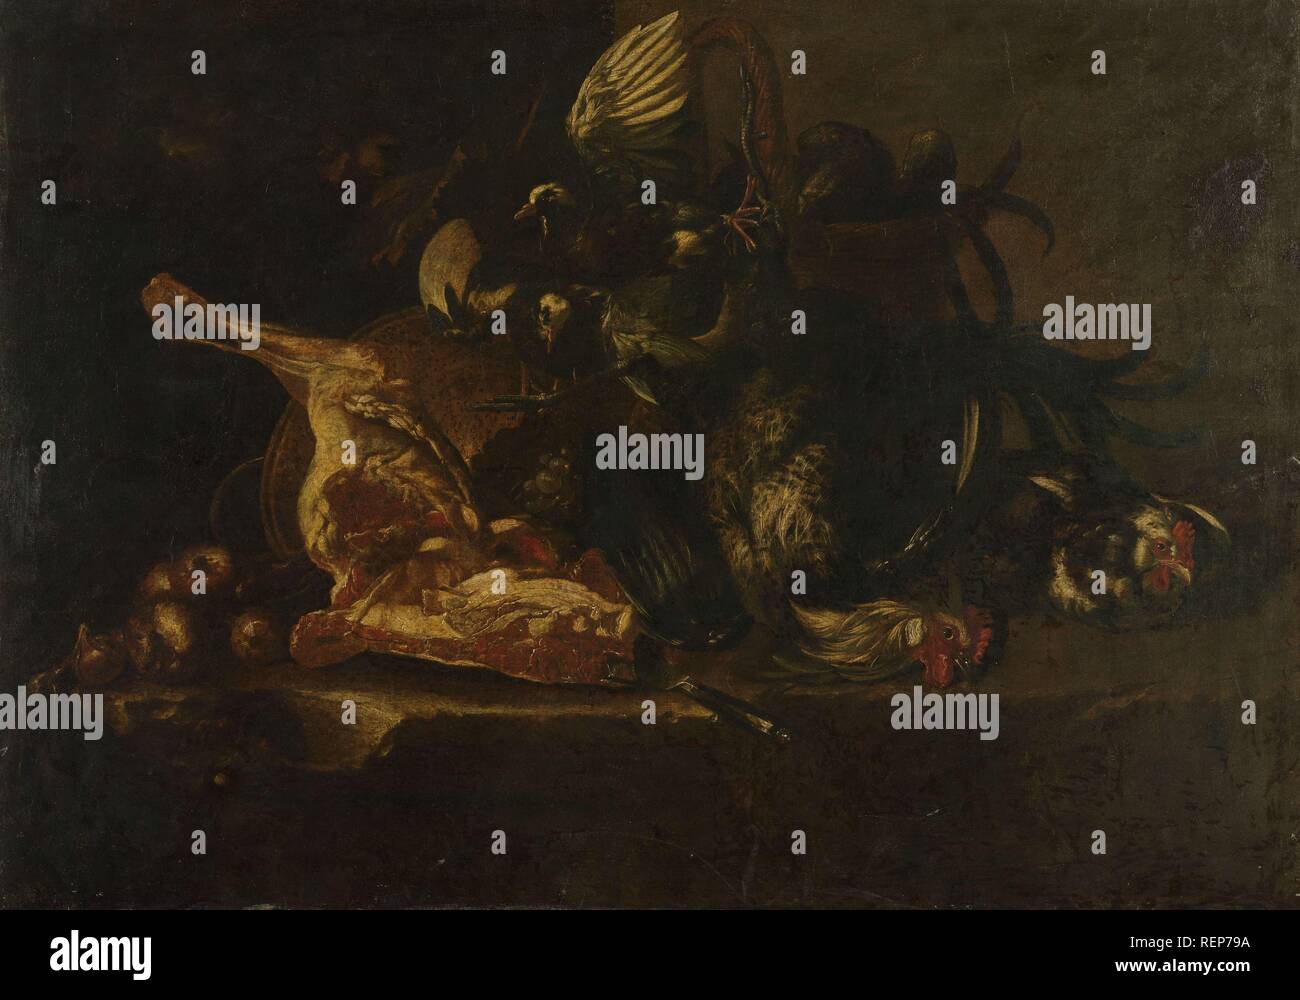 Still life with meat and dead birds. Dating: 1660 - 1671. Measurements: h 87 cm × w 123 cm. Museum: Rijksmuseum, Amsterdam. Author: Christoffel Puytlinck. Stock Photo